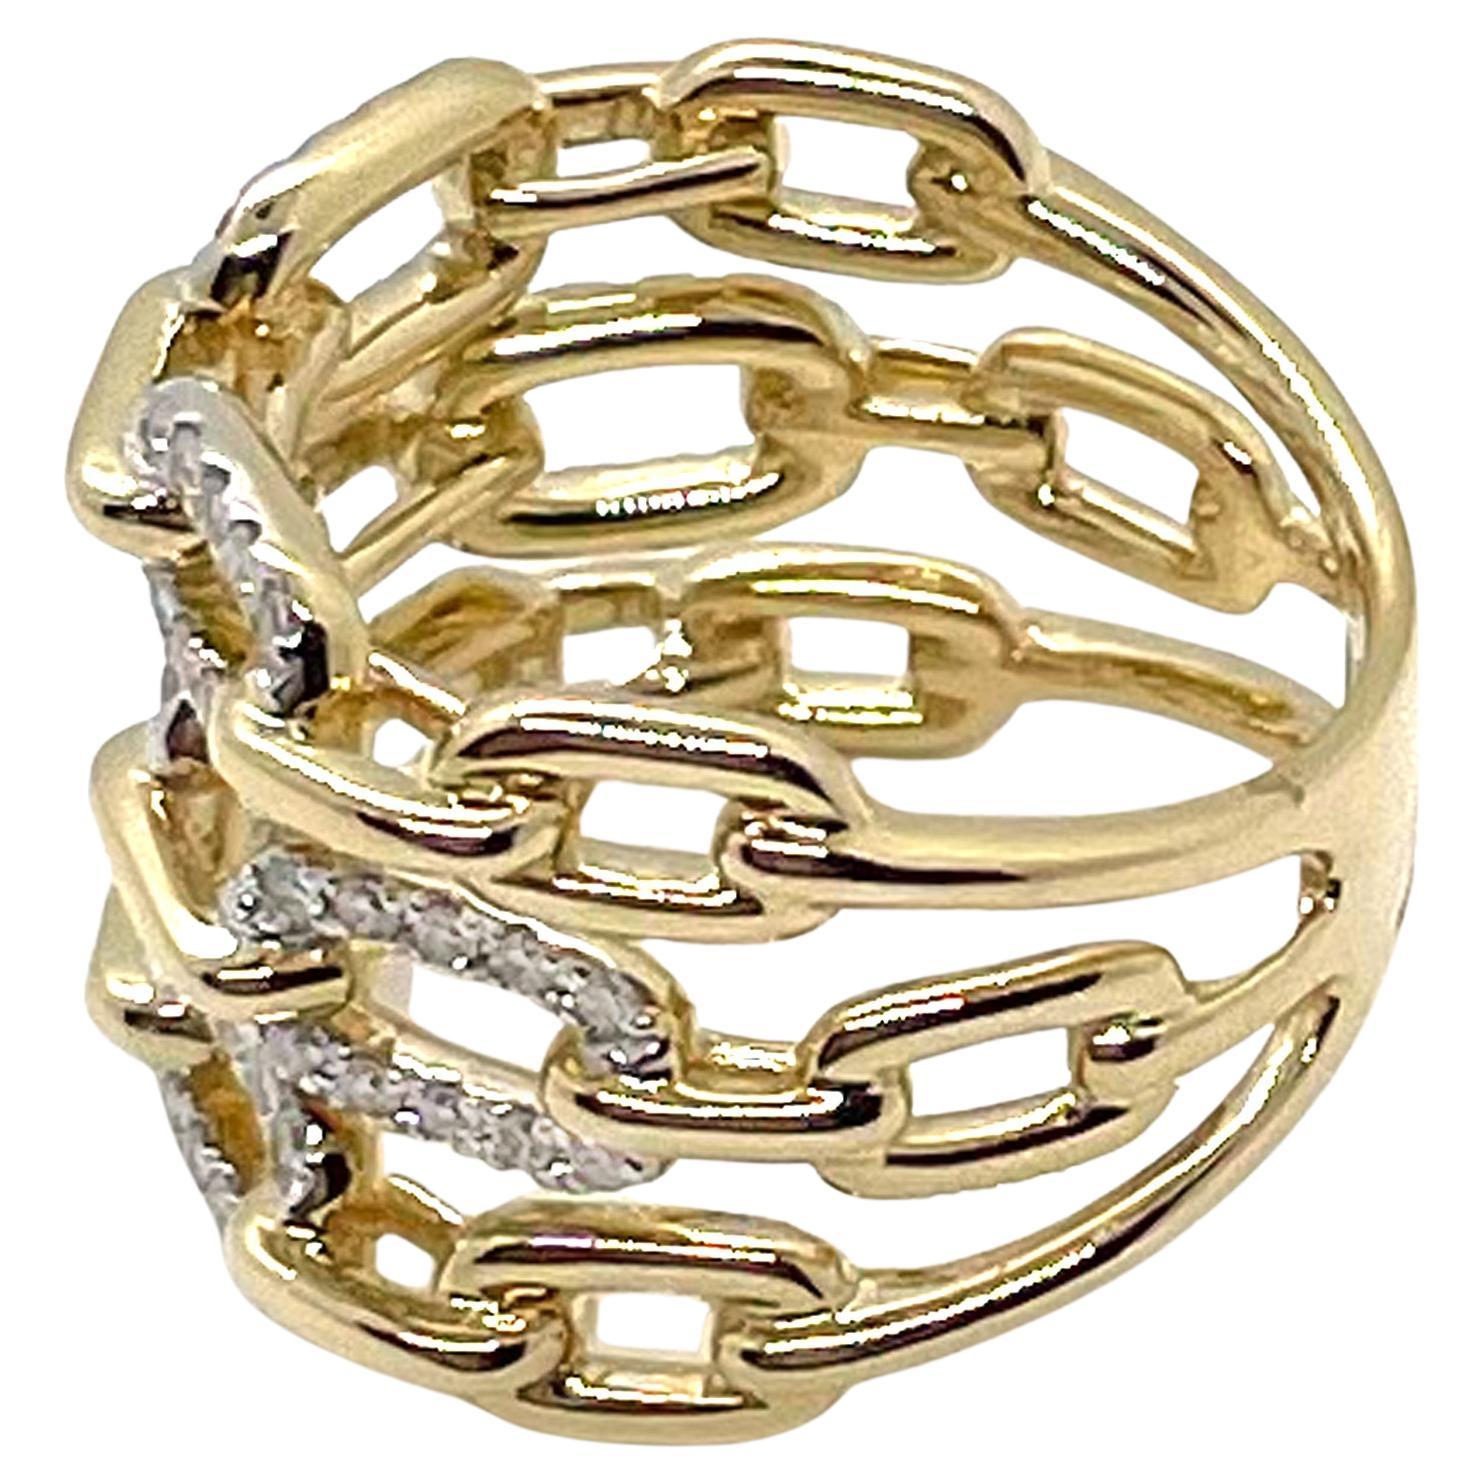 14K yellow gold ring with three rows of paperclip links and 0.55 carat round brilliant-cut diamonds.

* Diamonds are H color, SI1 clarity.
* Finger size 6.5
* The top is 15.3mm wide and tapers down to 6.2mm wide.